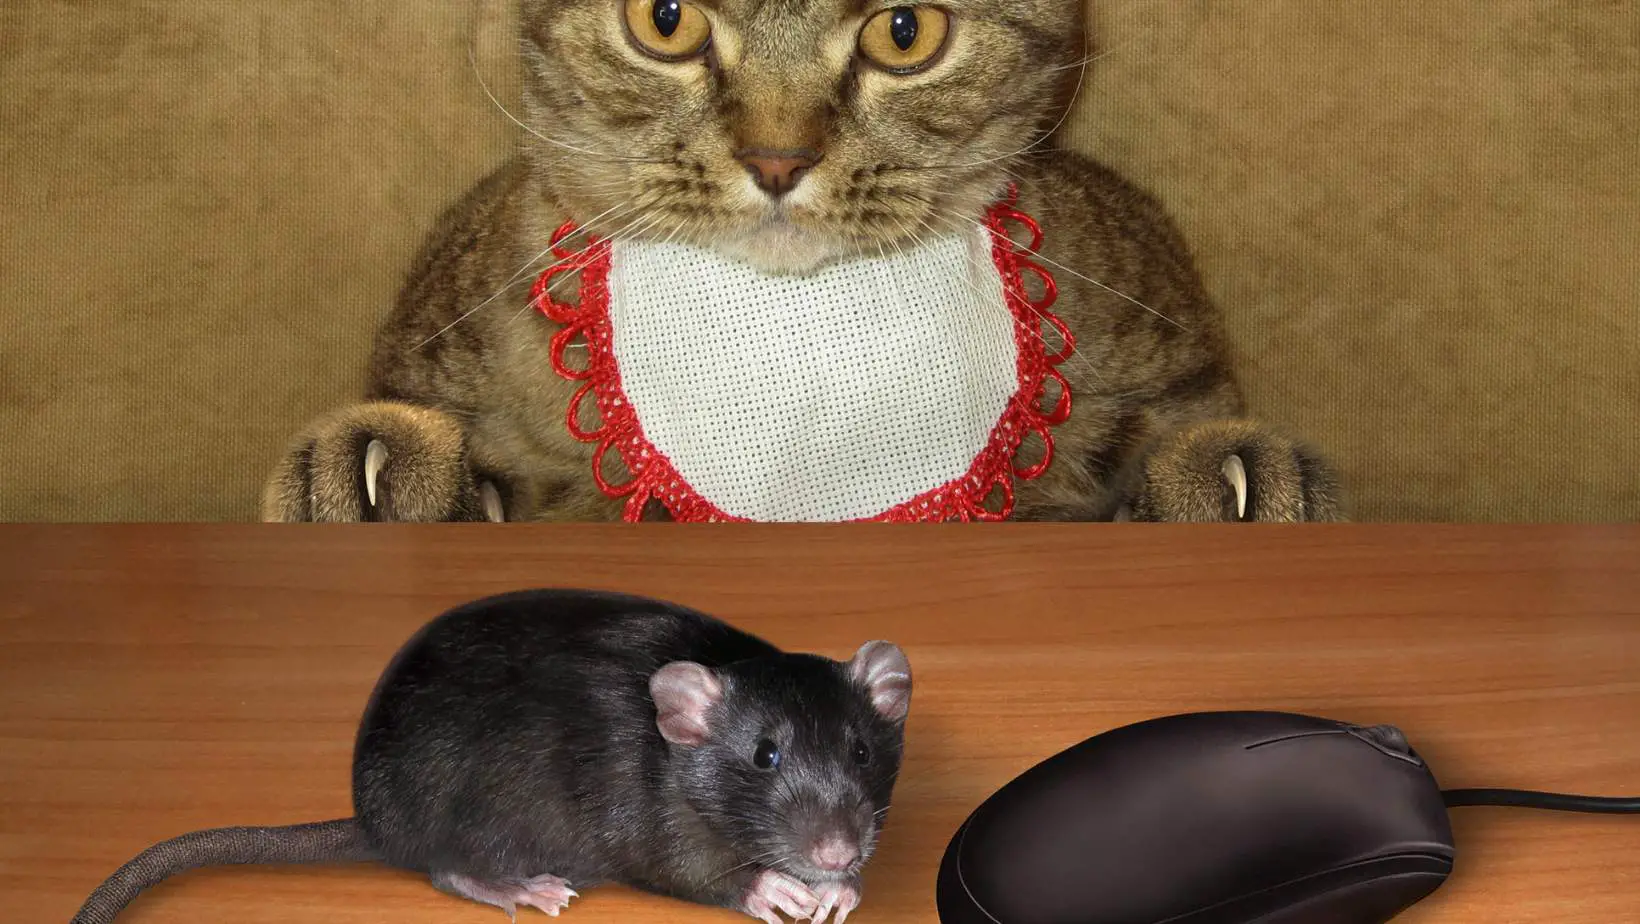 Why Do Cats Eat Mice?